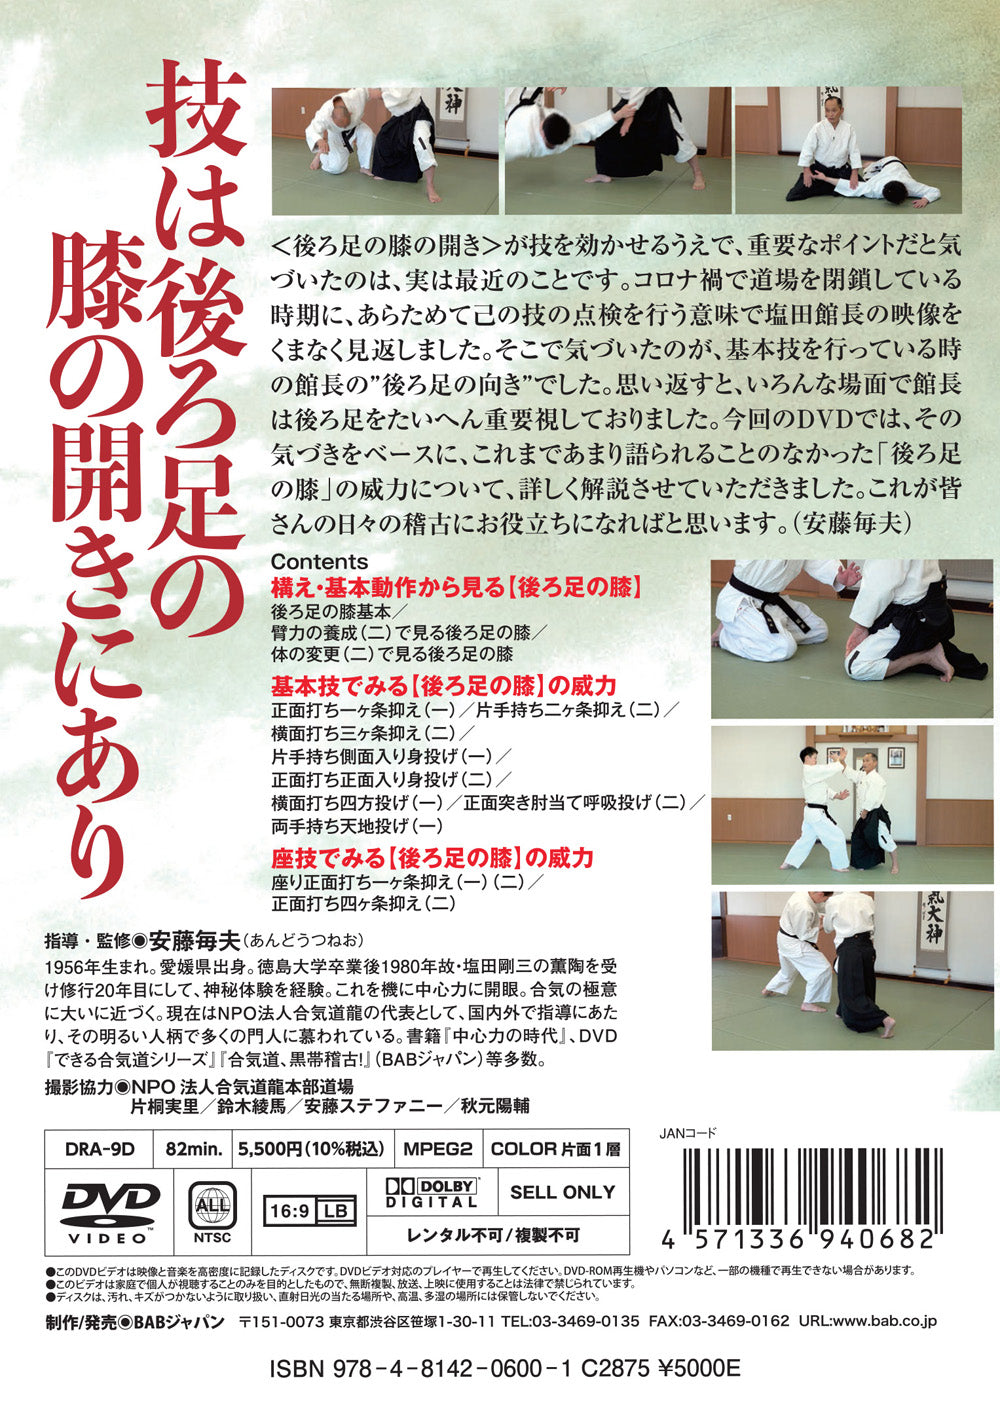 Dragon Aikido: The Power of the Knee in the Back Leg DVD by Tsuneo Ando